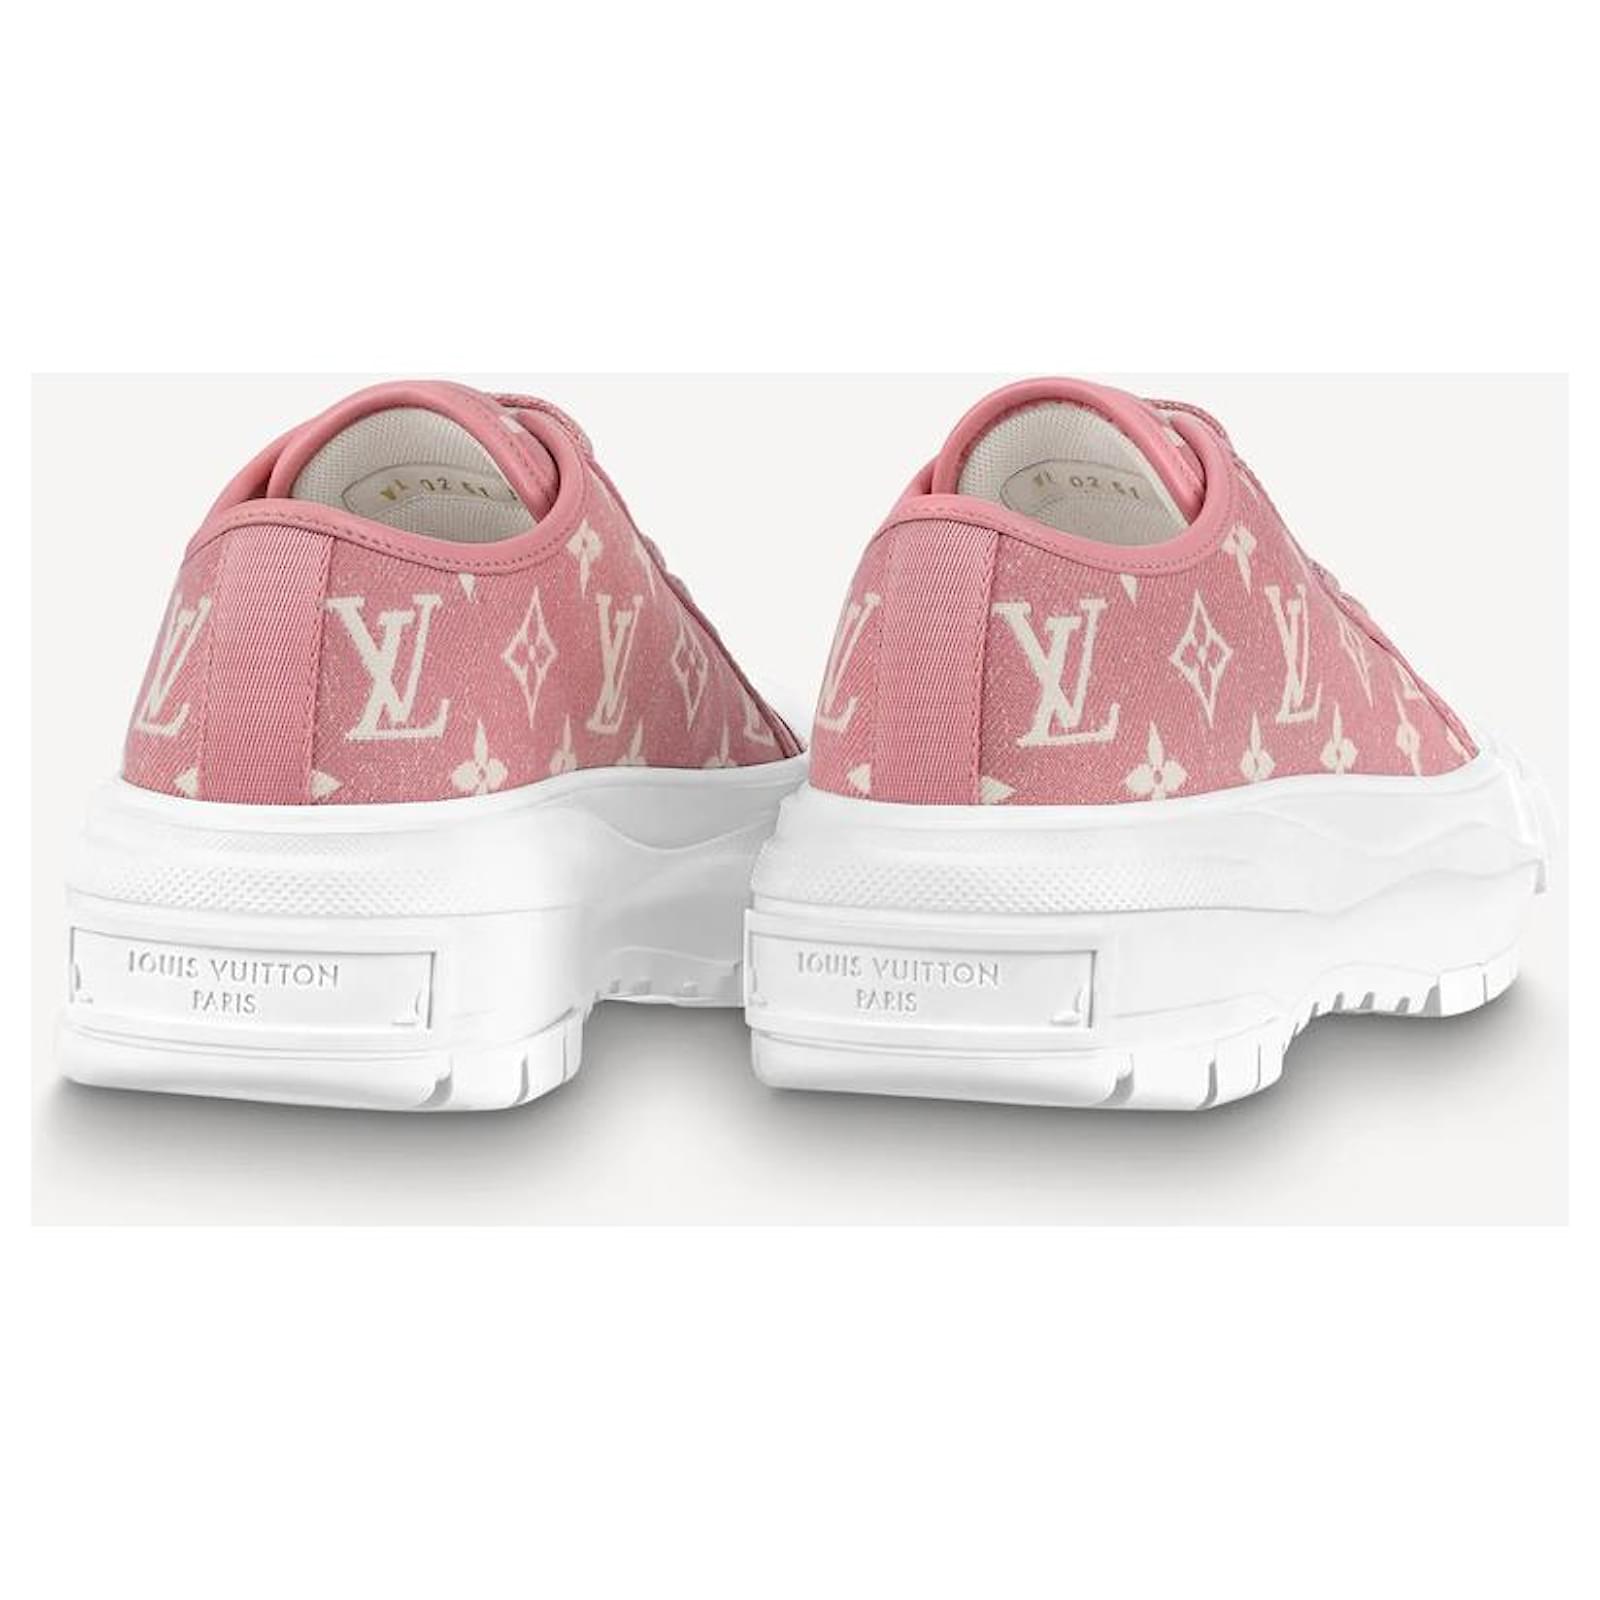 LV Squad Trainer Boots - Luxury Pink